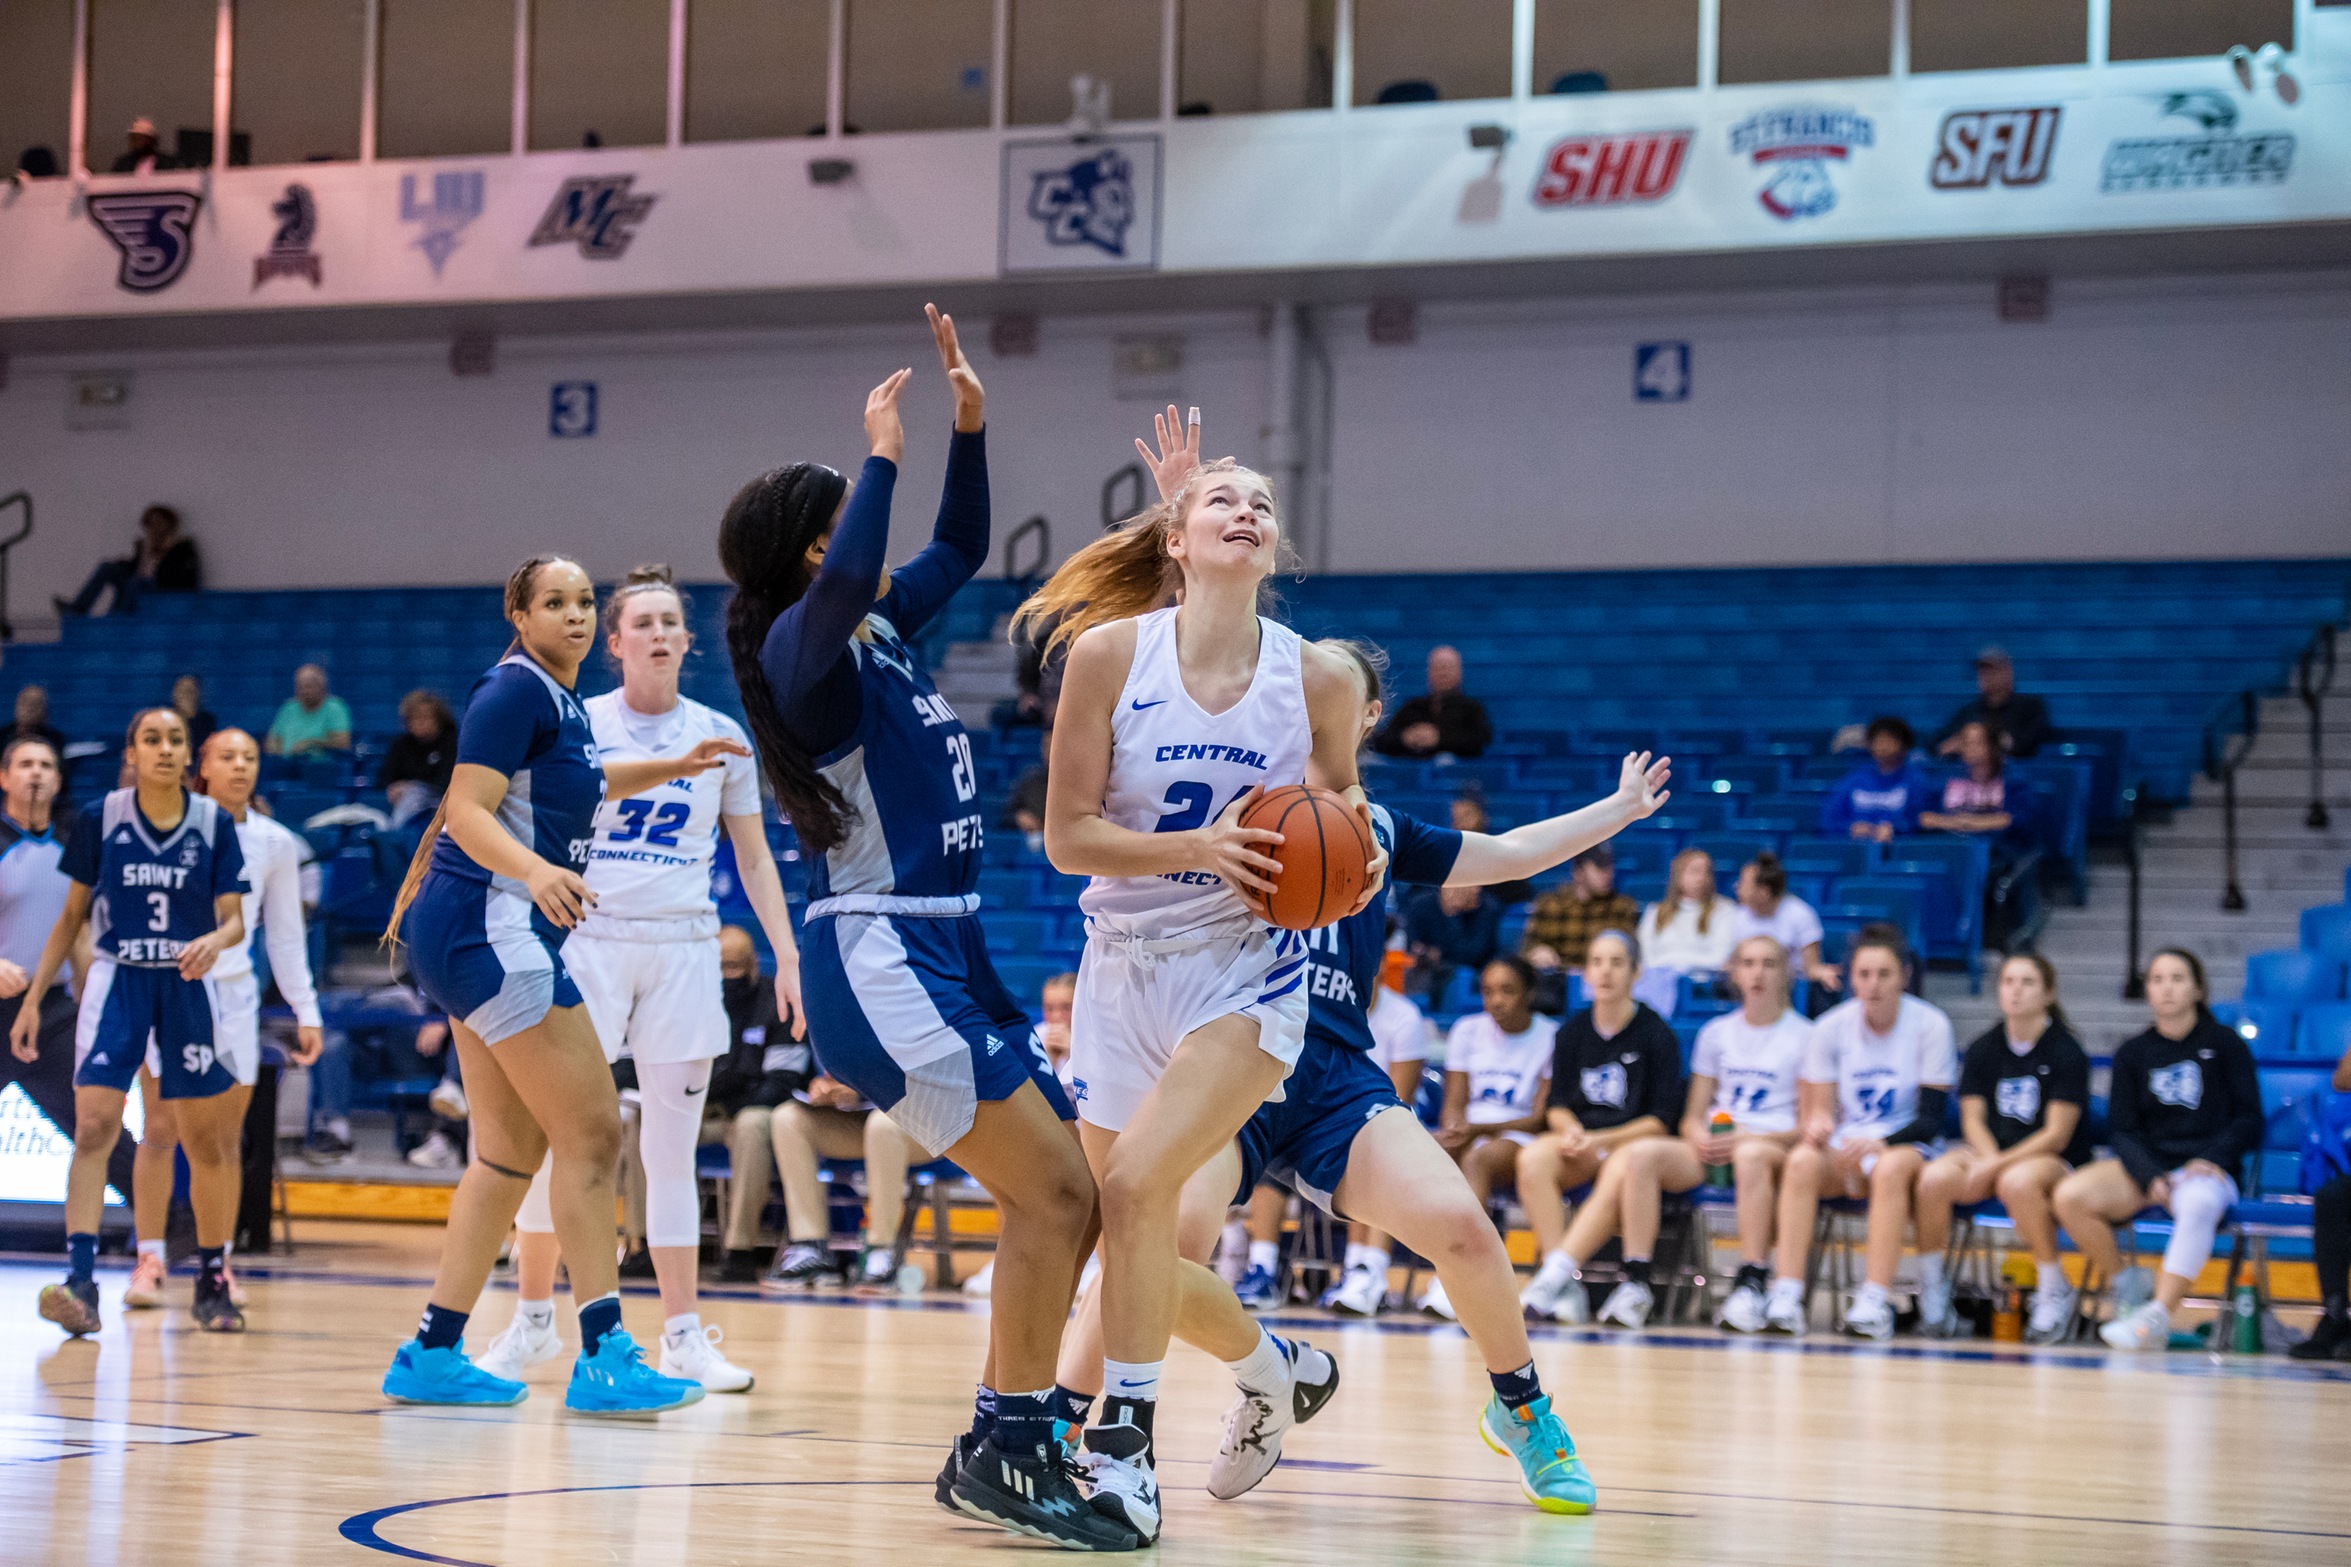 Lara Rohkohl had 15 rebounds Saturday, the most since Ashley Berube collected 18 at Sacred Heart on January 8, 2020. She also scored nine points. (Photo: Steve McLauglin)